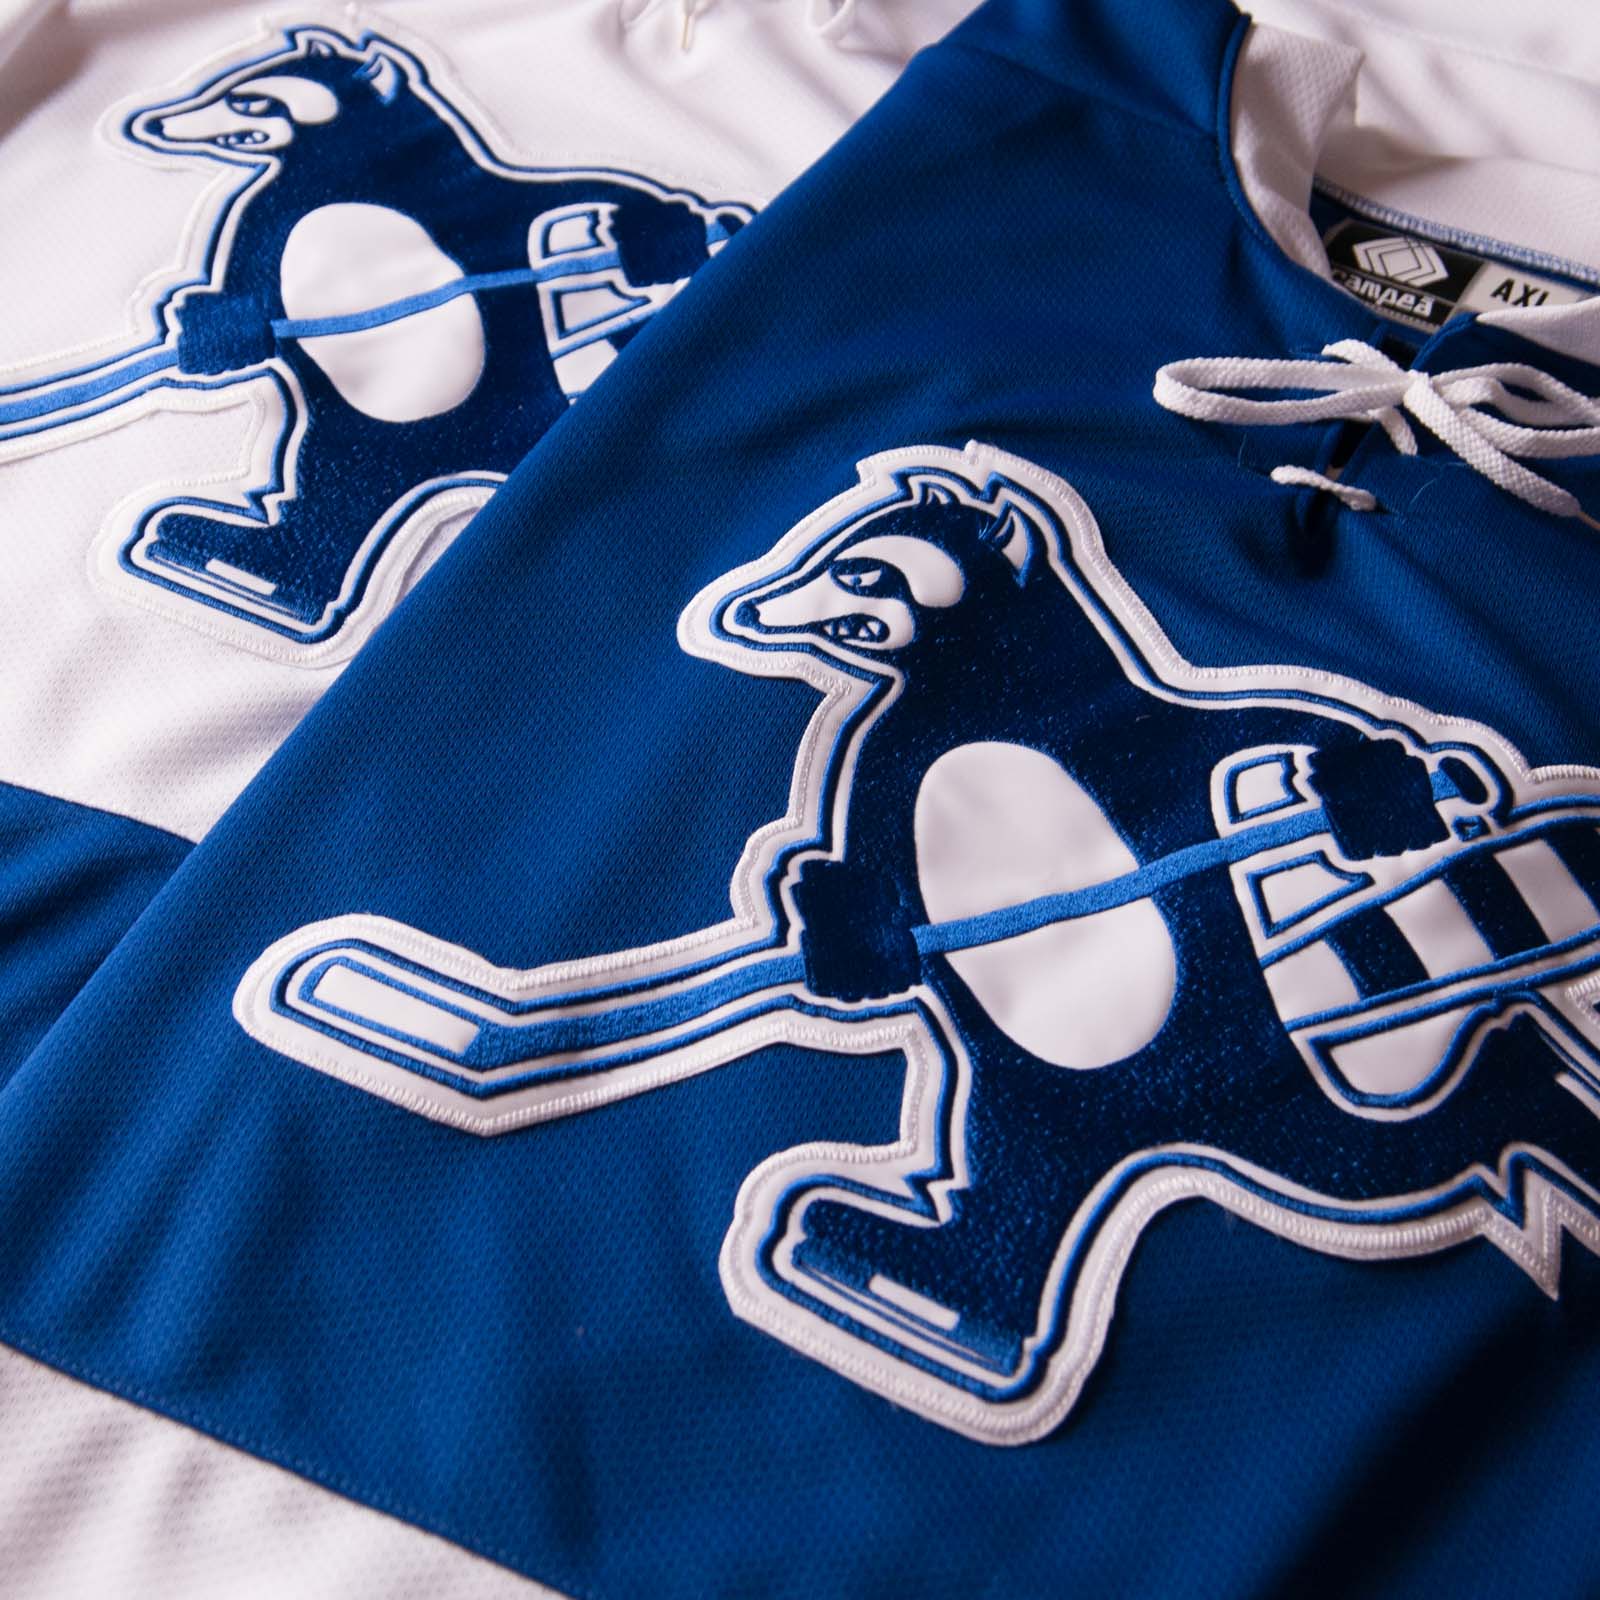 Blue and white PPHC jerseys